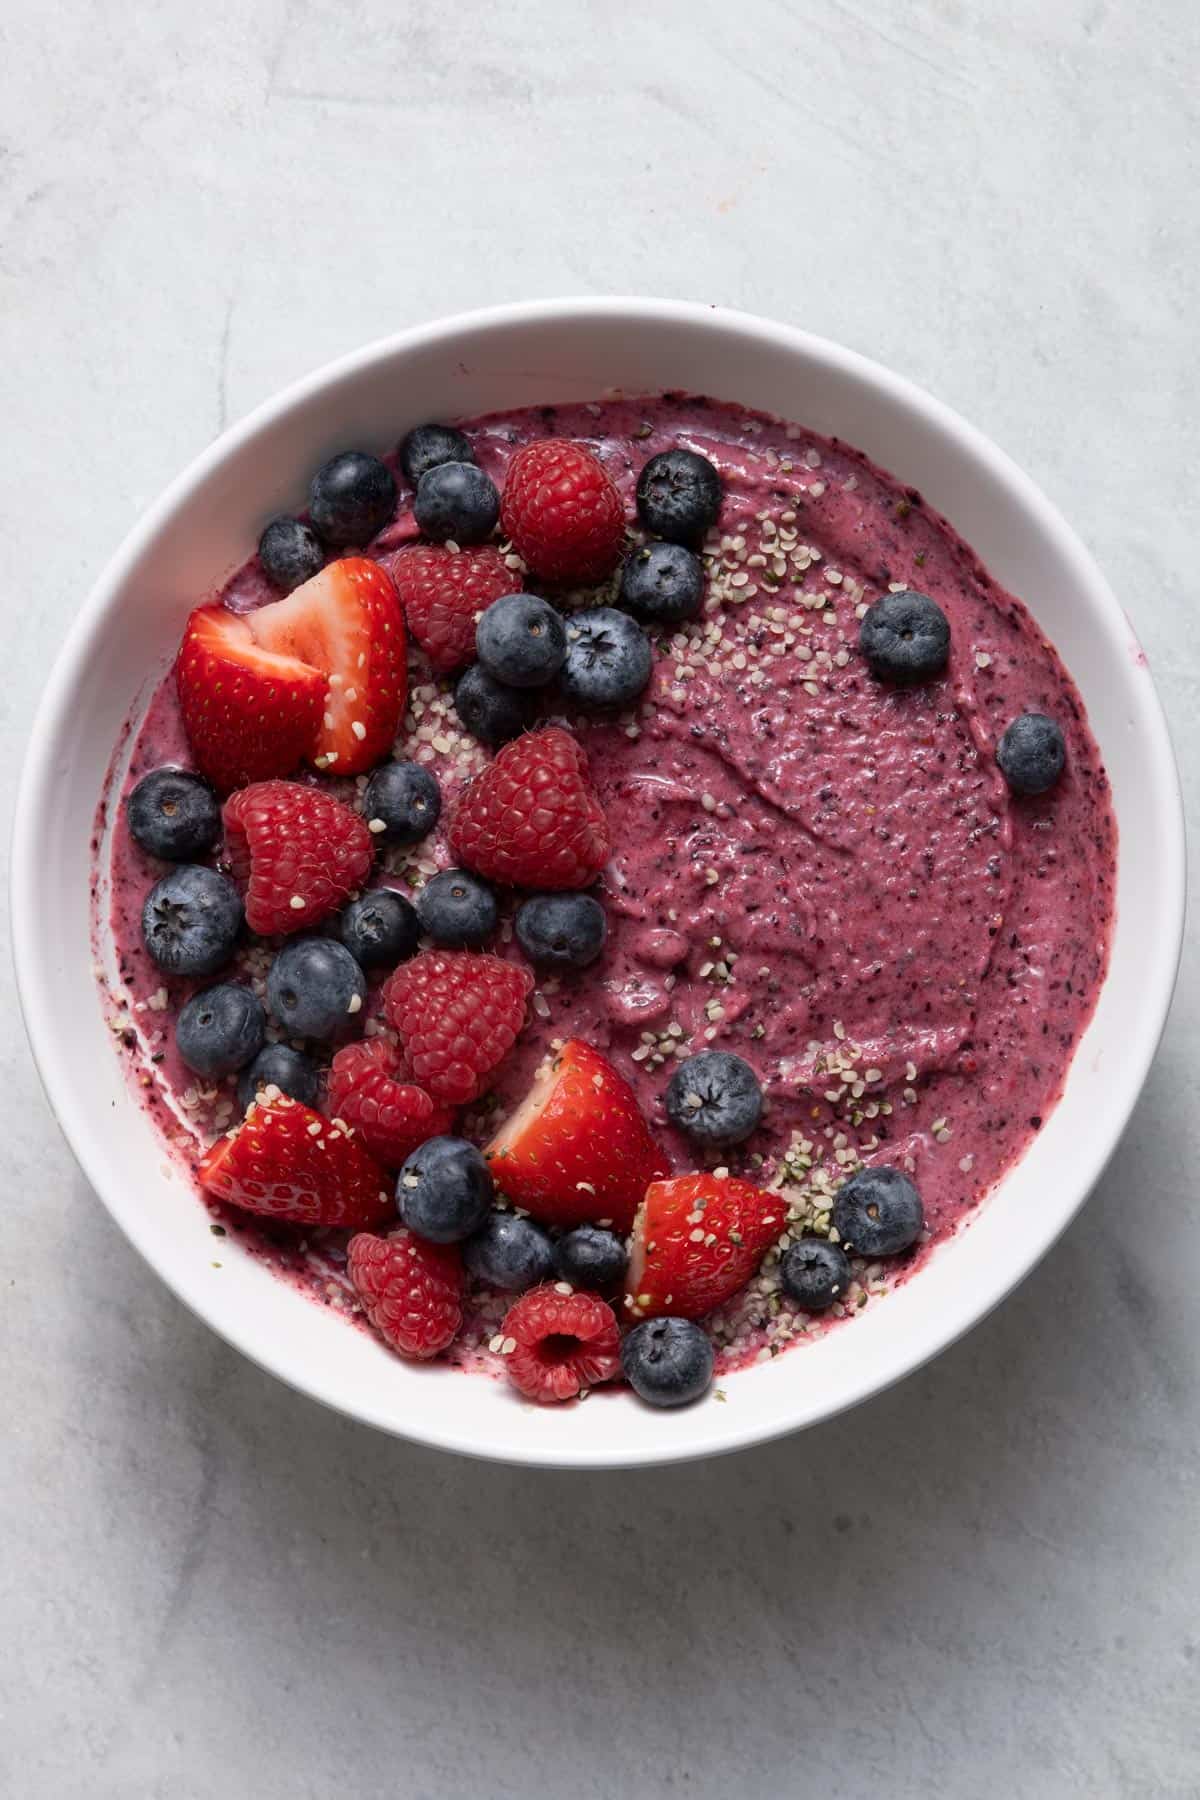 Strawberry blueberry smoothie bowl topped with berries